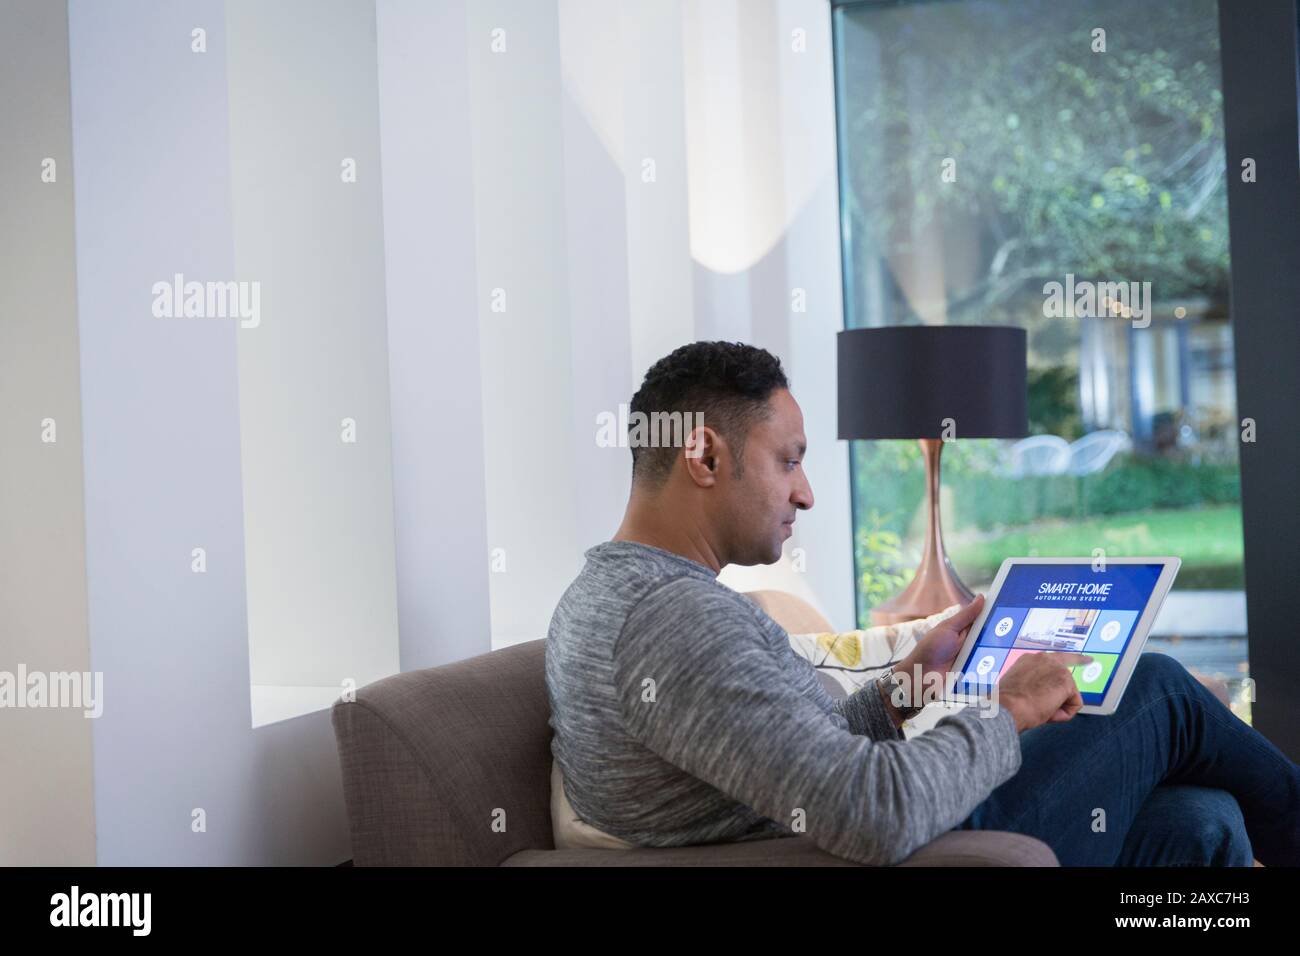 Man setting smart home alarm system from digital tablet on living room sofa Stock Photo